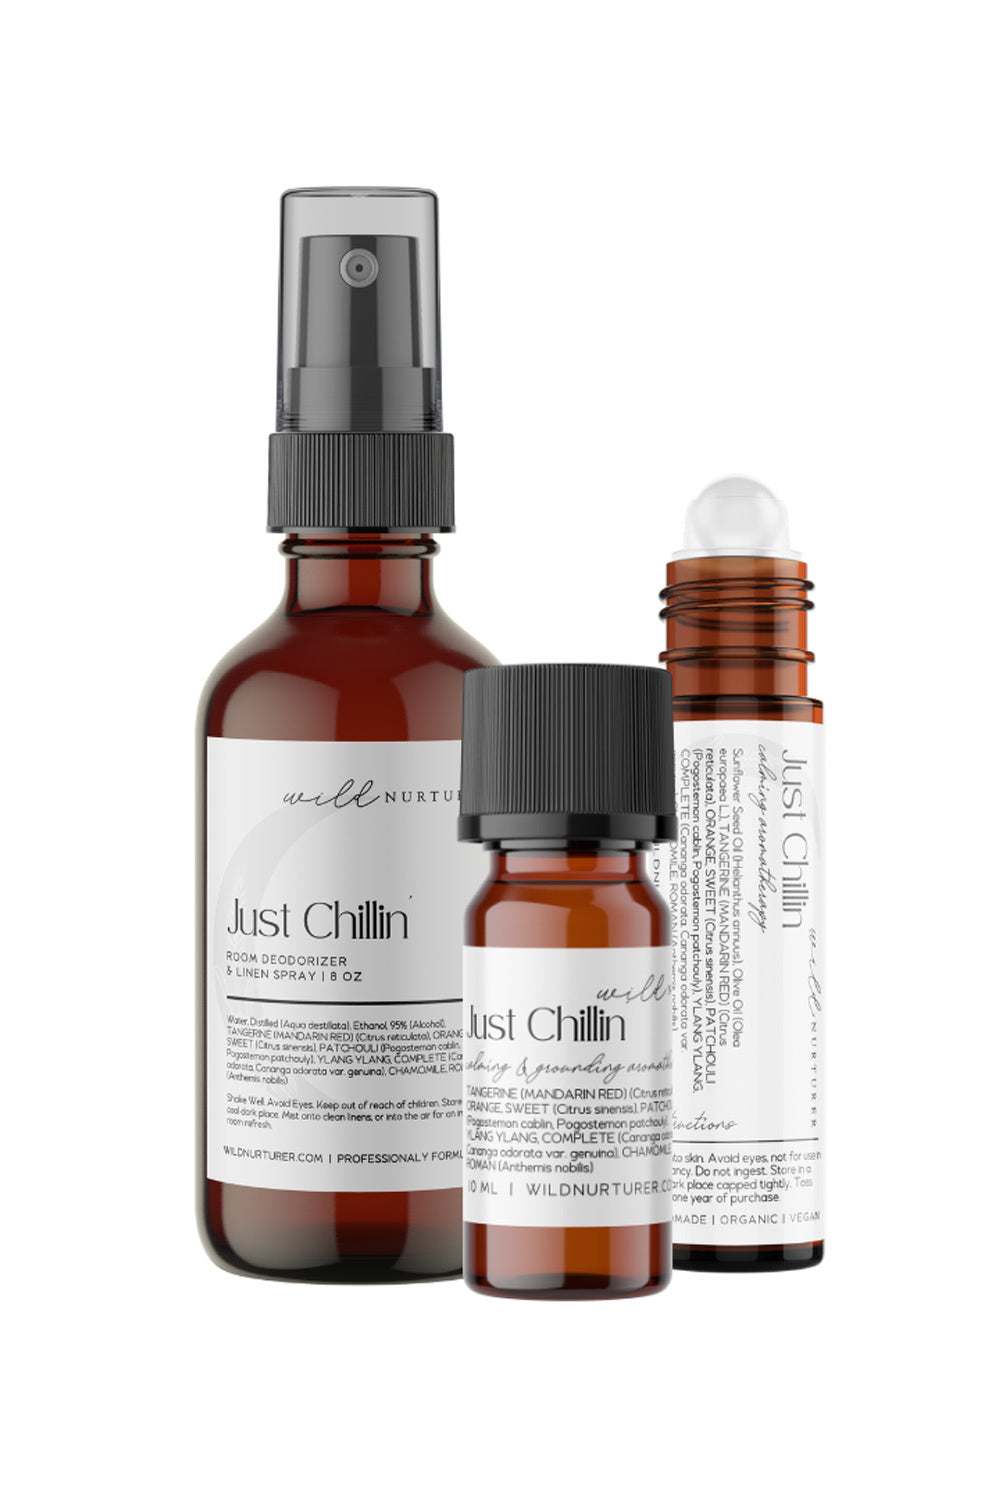 Two "Just Chillin' Aromatherapy Blend" by Wild Nurturer Aromatherapy, including a spray bottle and a dropper bottle of essential oil, isolated on a white background.